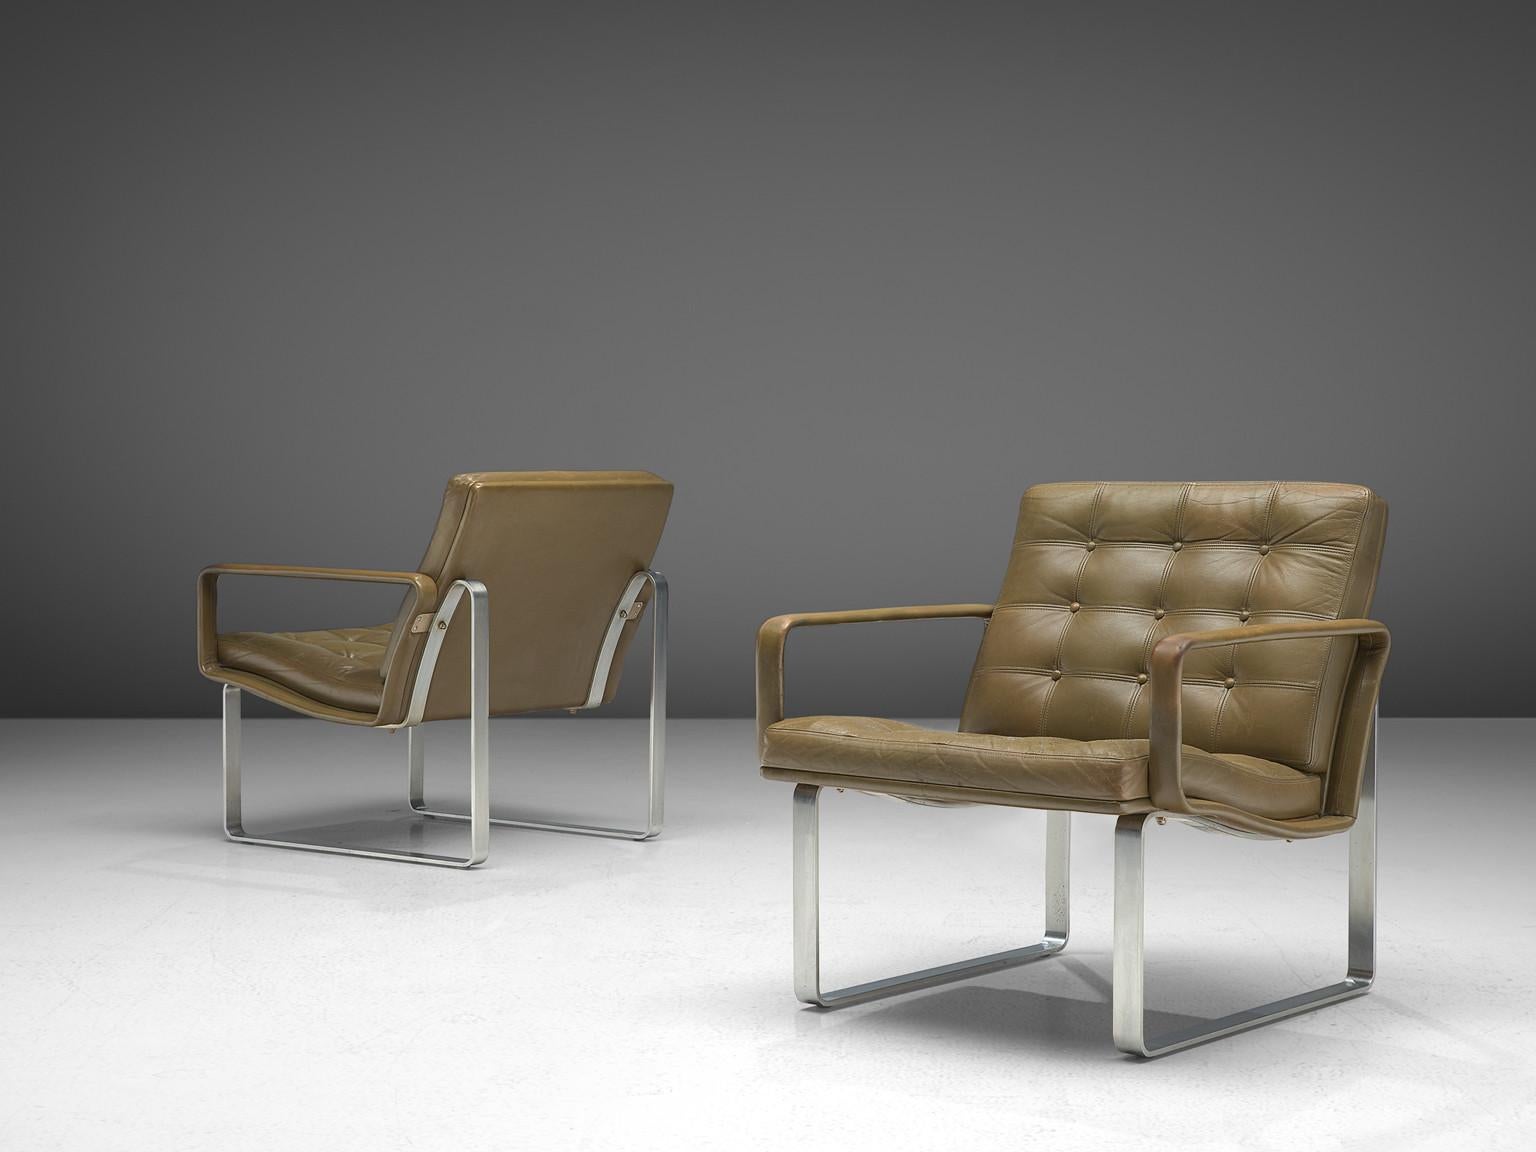 Ole Gjerløv-Knudsen & Torben Lind for France & Søn, pair of armchairs, chrome-plated metal and leather, Denmark, 1962 

These lounge chairs are designed by Ole Gjerløv-Knudsen & Torben Lind as part of the Moduline series established in 1961.